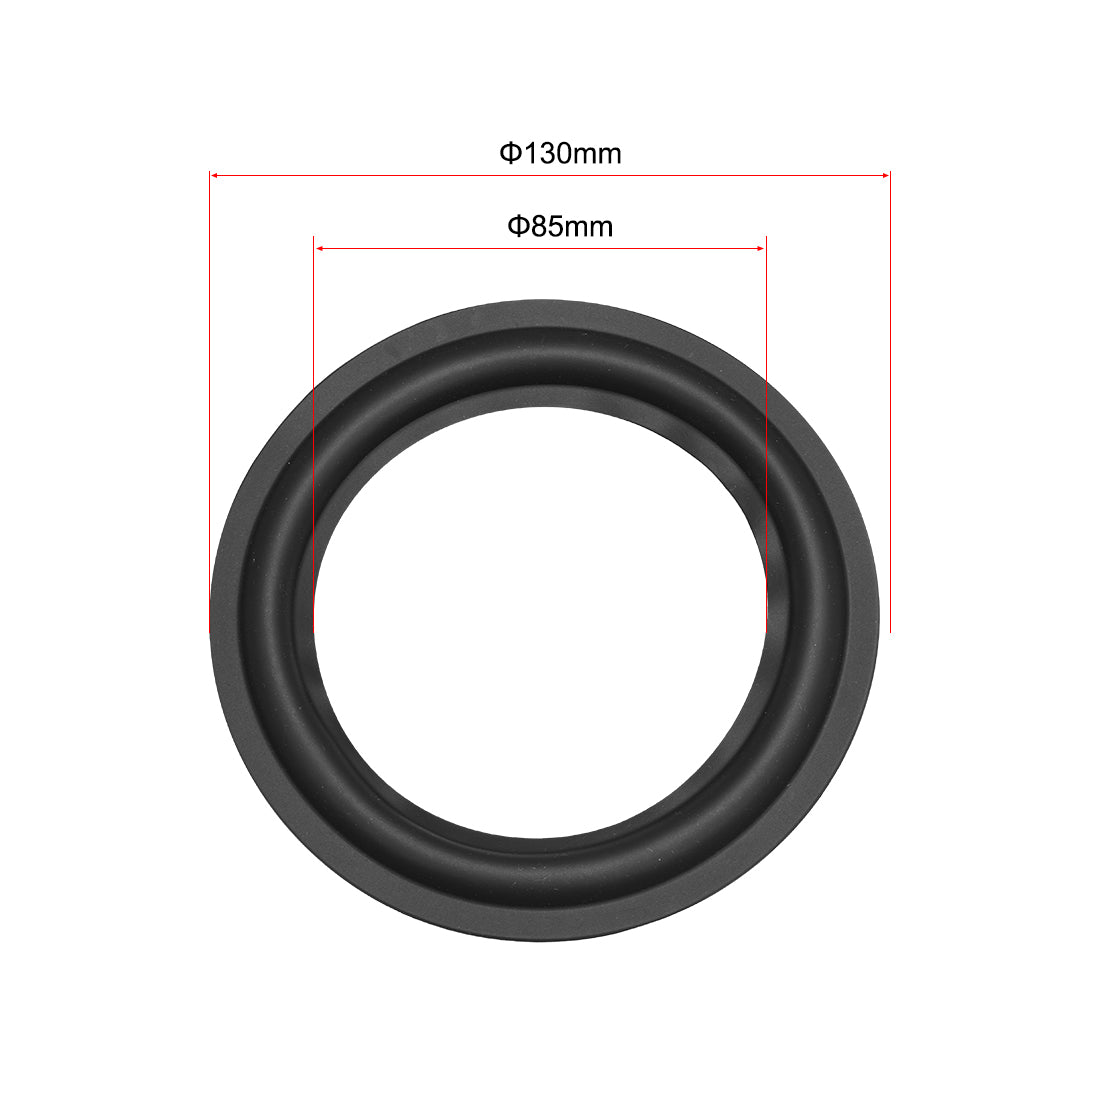 uxcell Uxcell 5" 5inch Speaker Rubber Edge Surround Rings Replacement Part for Speaker Repair or DIY 4pcs